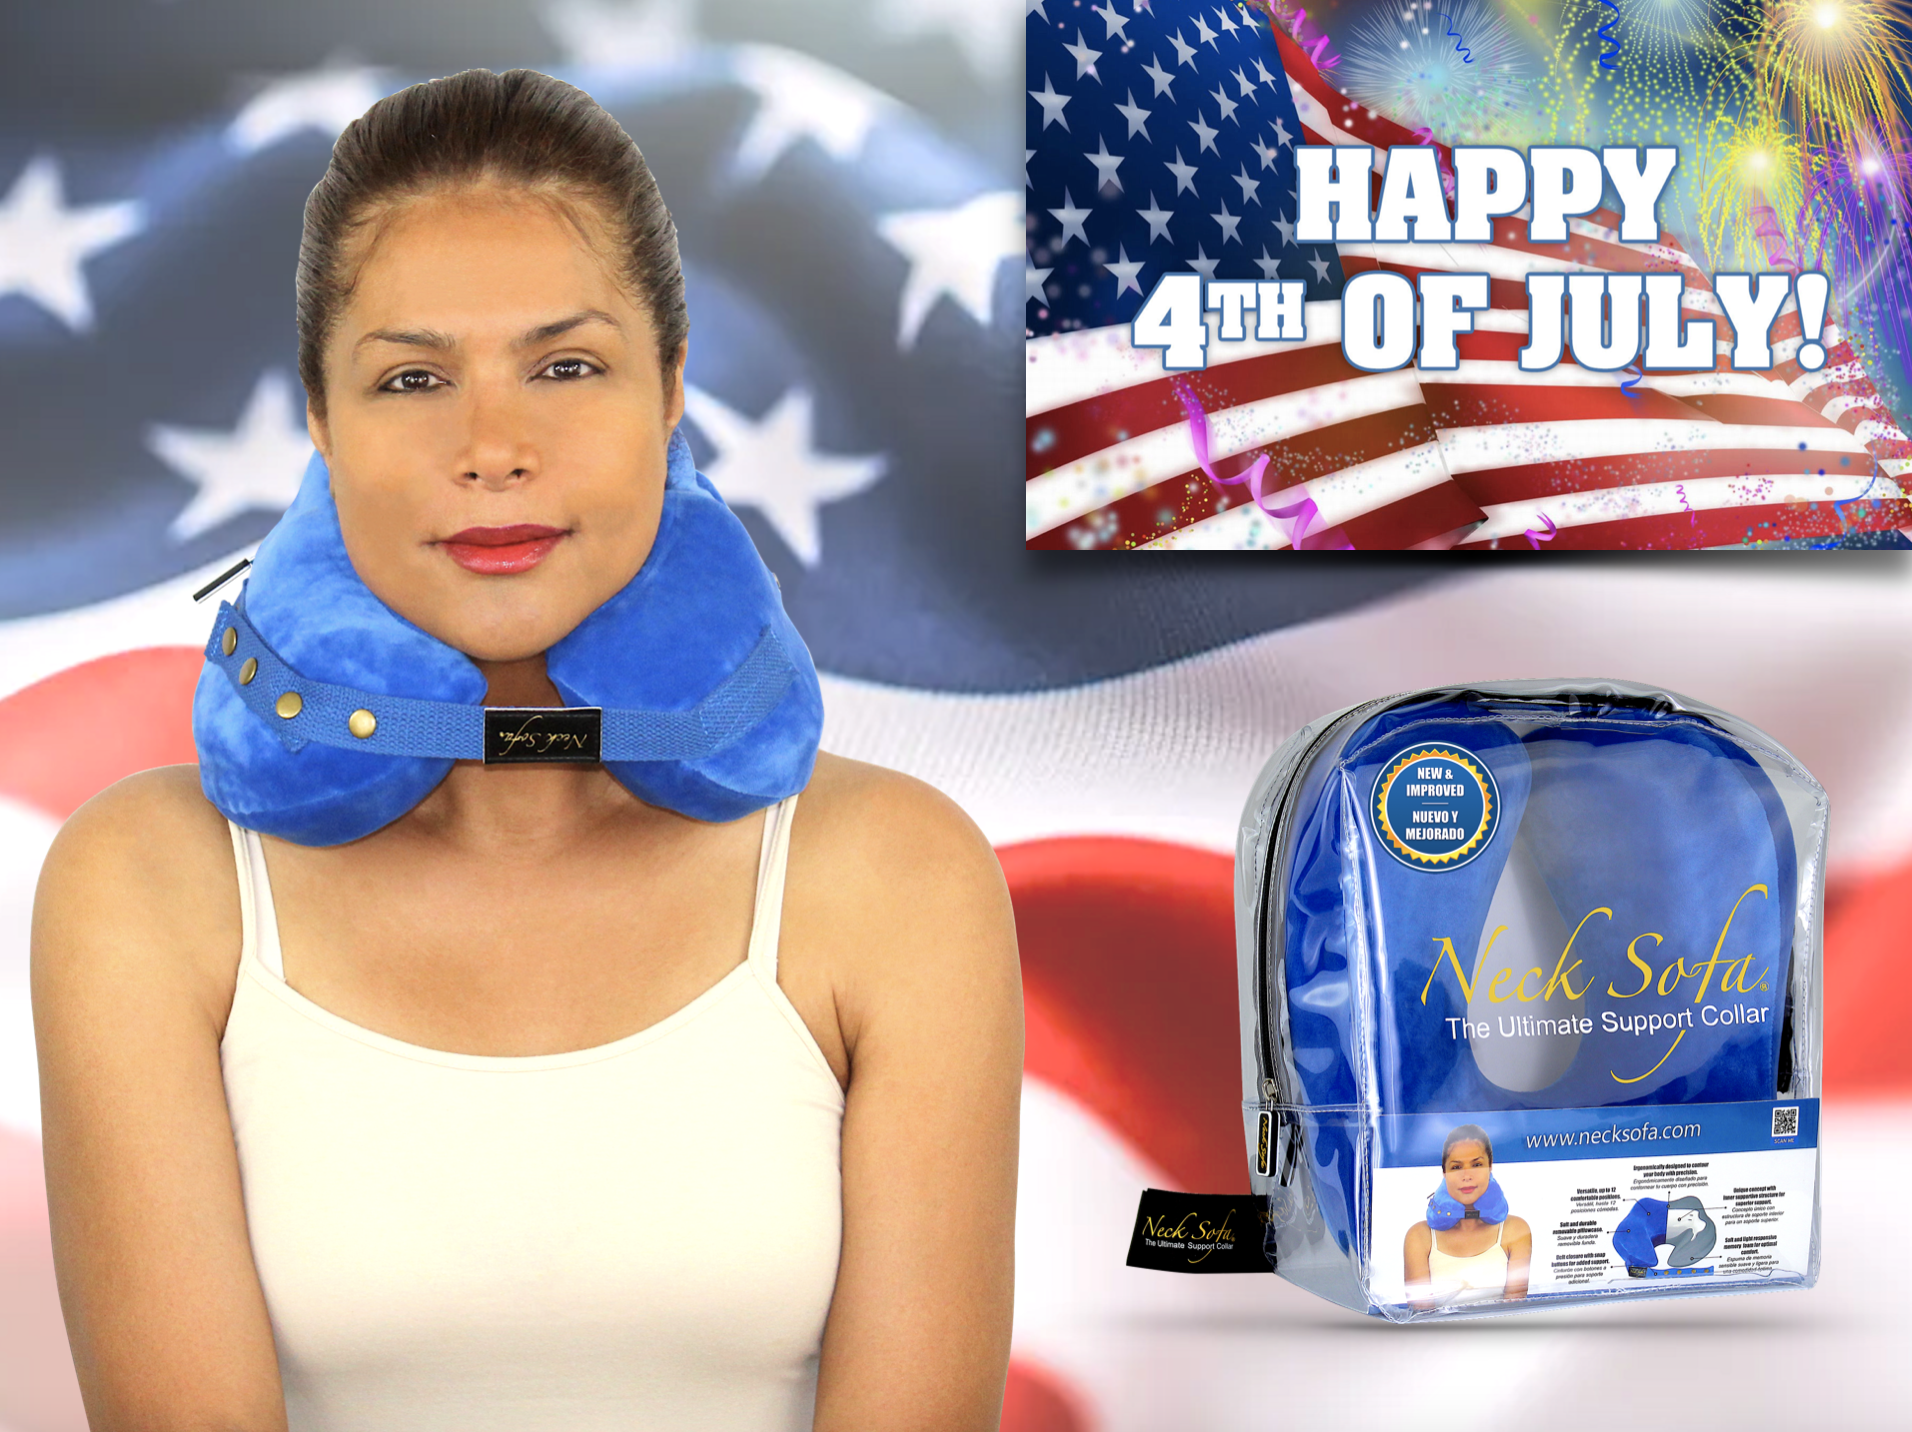 Happy 4th of July from the Neck Sofa® Team